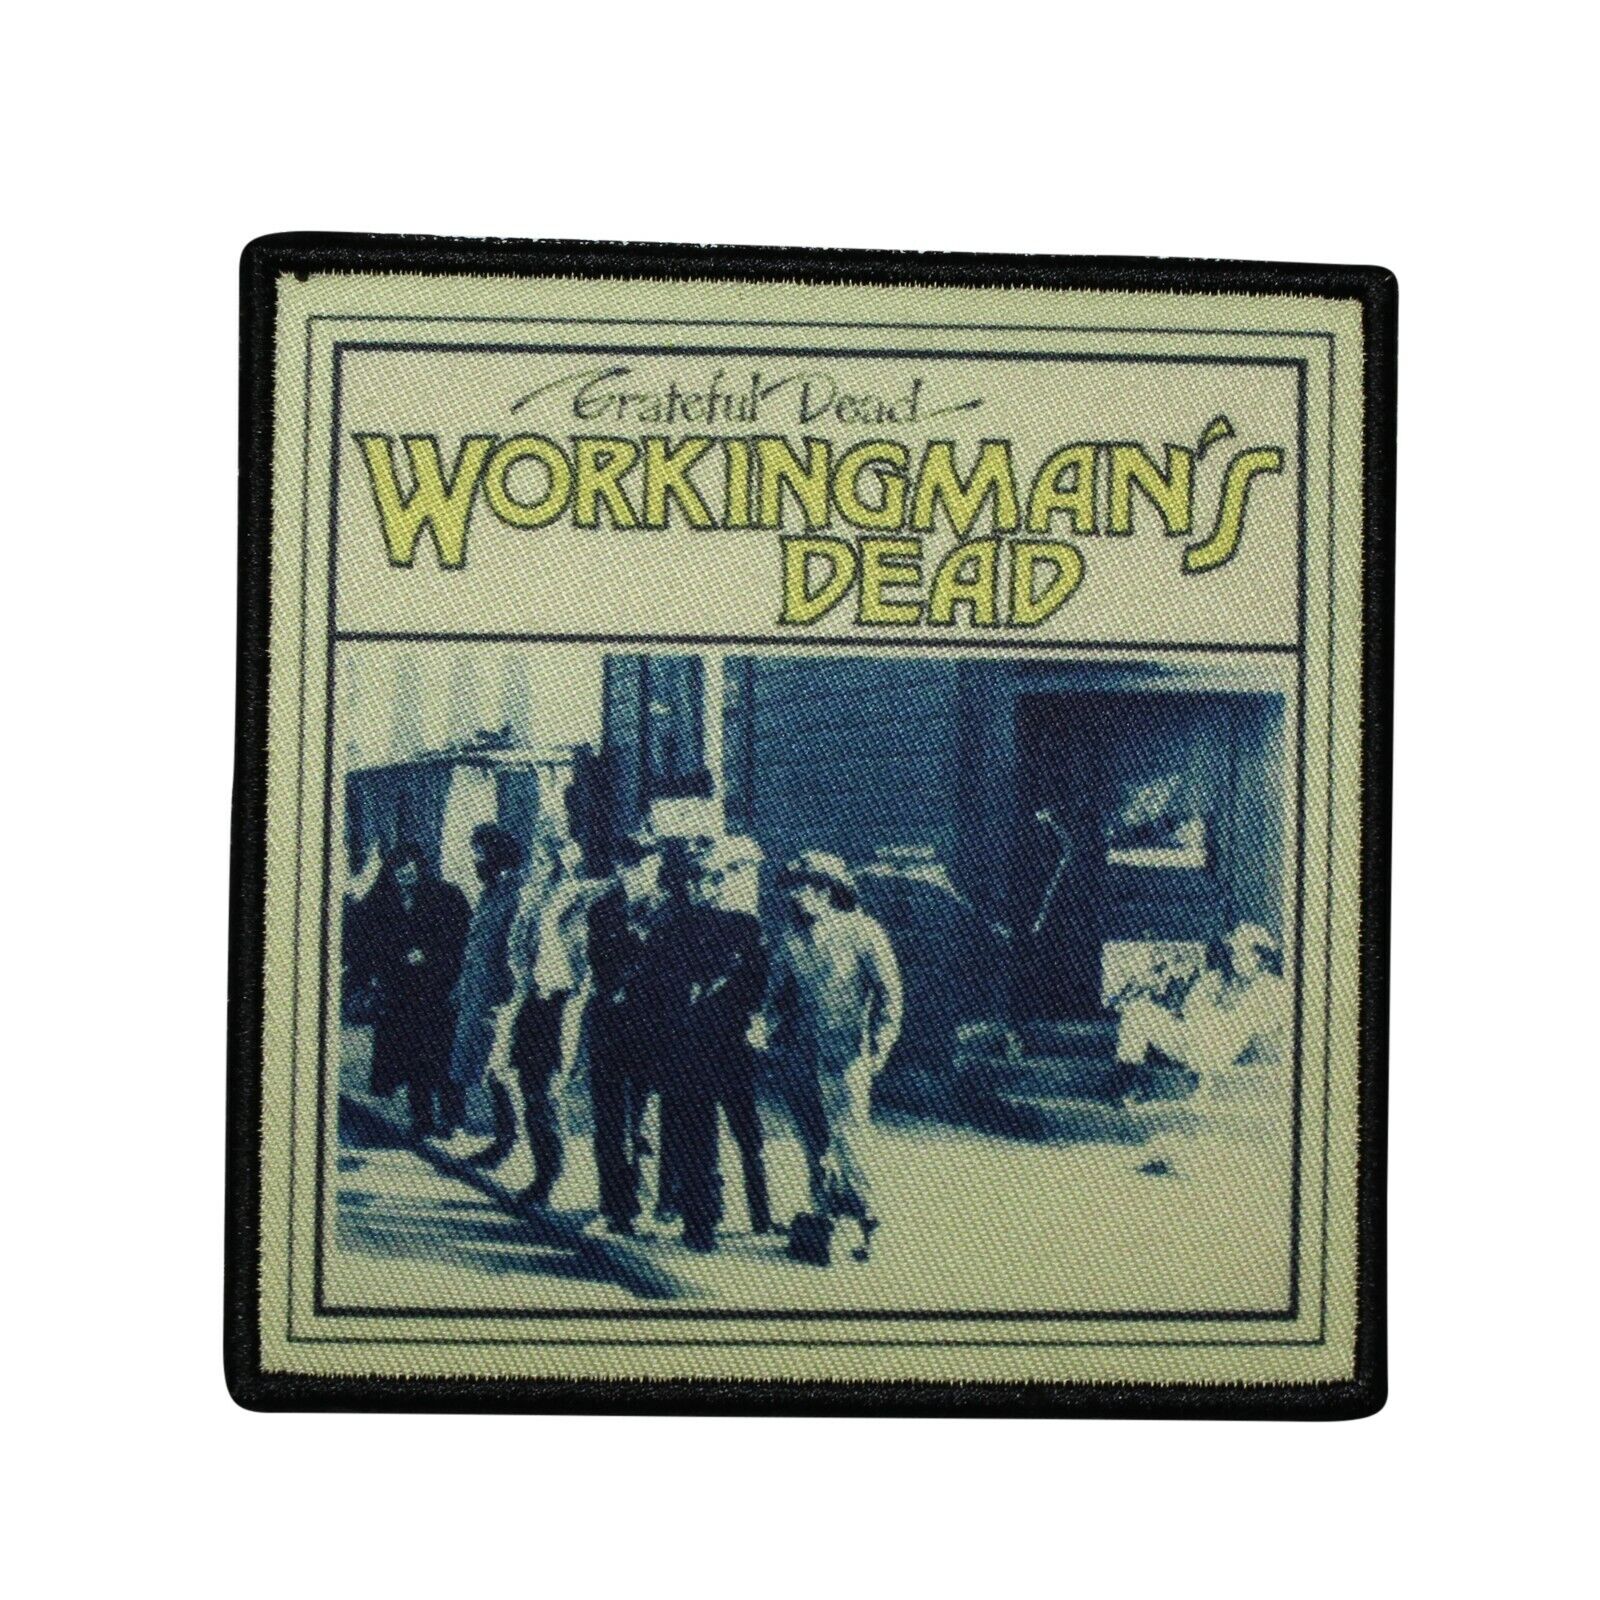 Grateful Dead Workingman's Printed Sew On Patch - Official 083-m